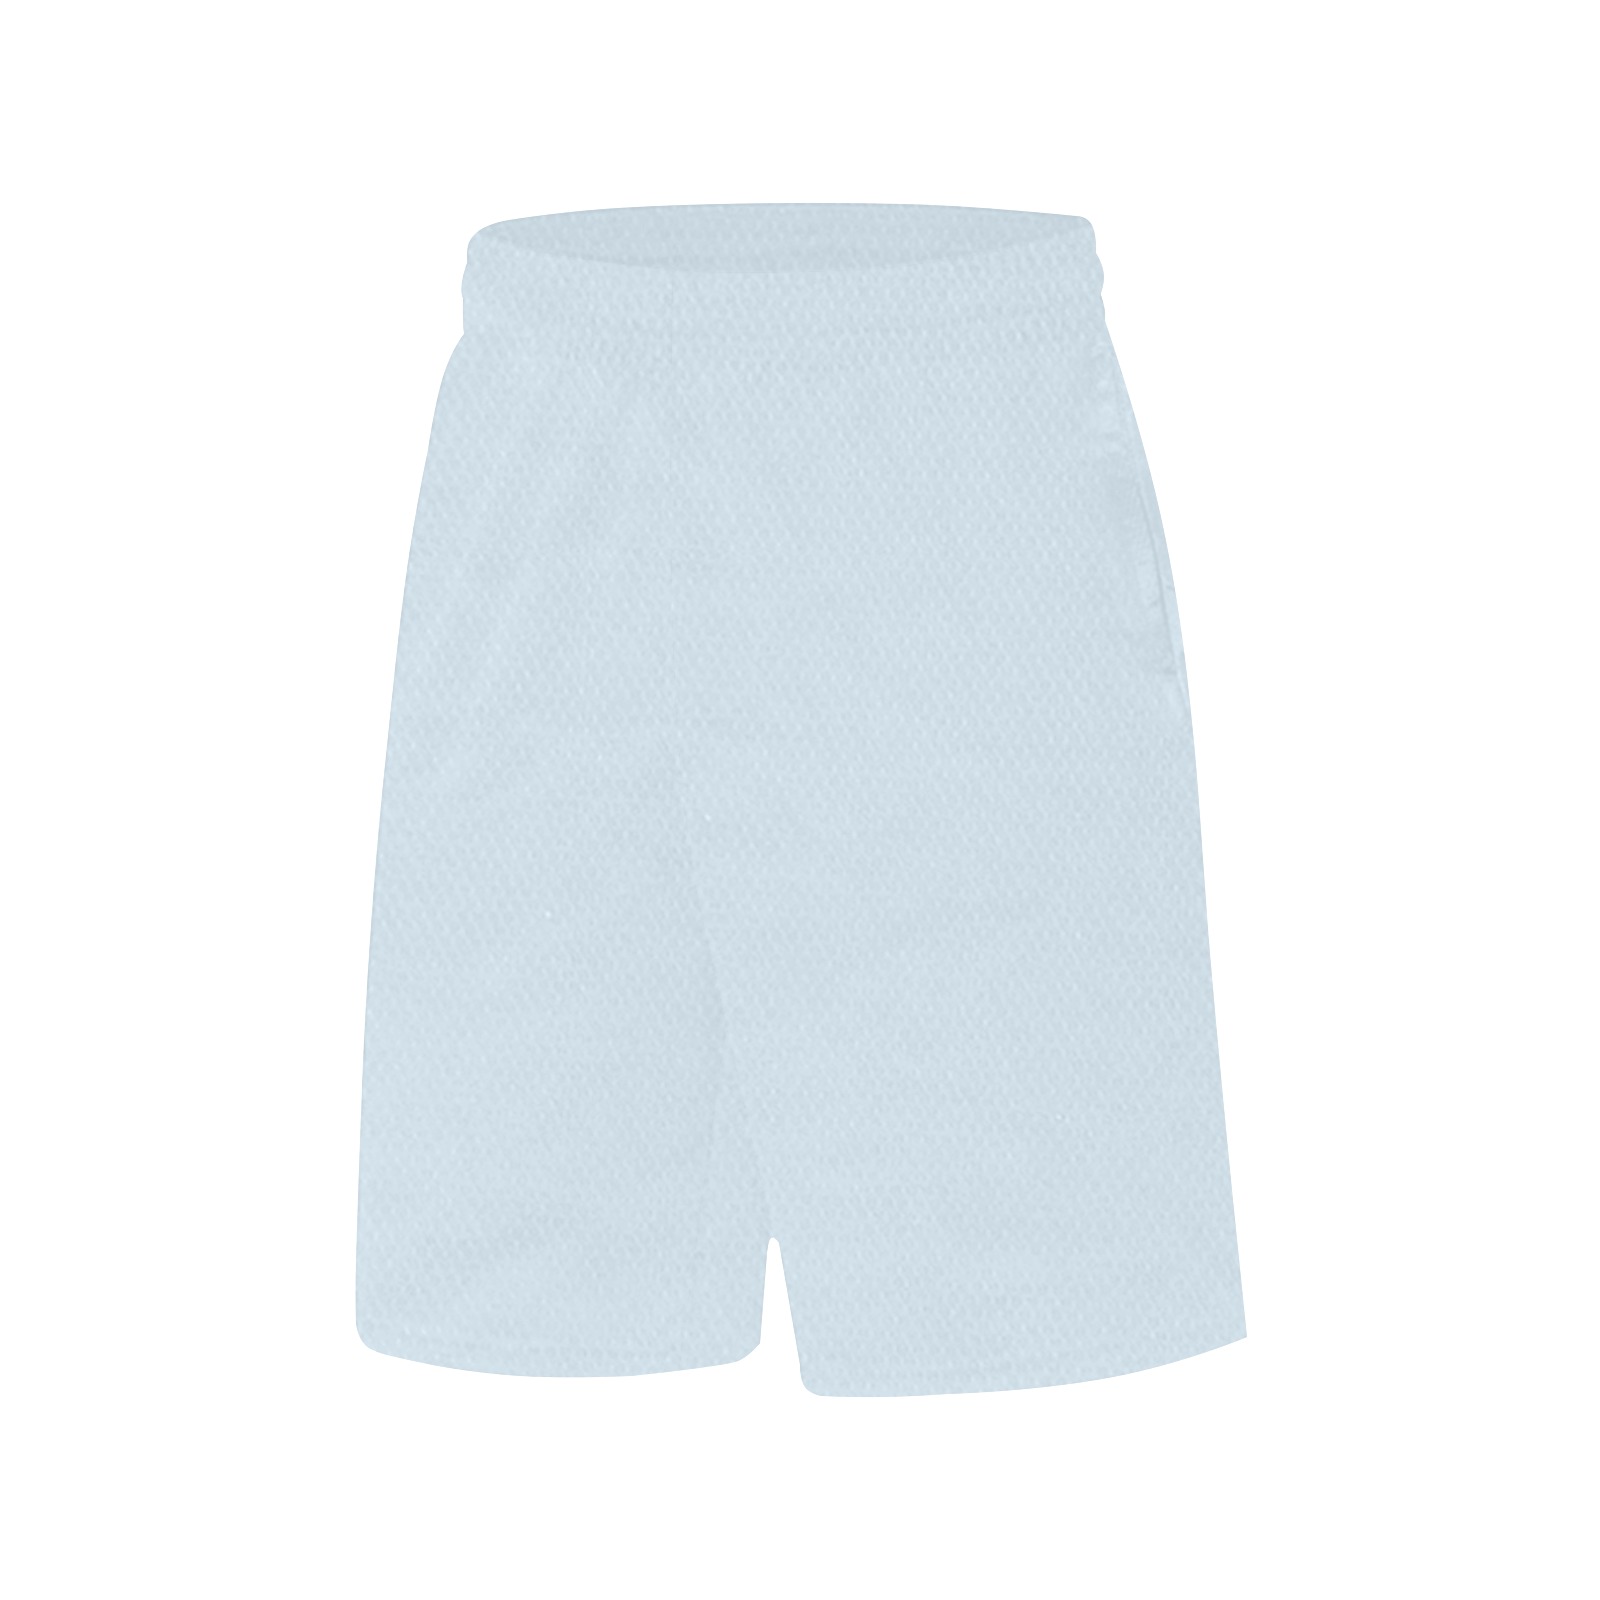 gray ice All Over Print Basketball Shorts with Pocket